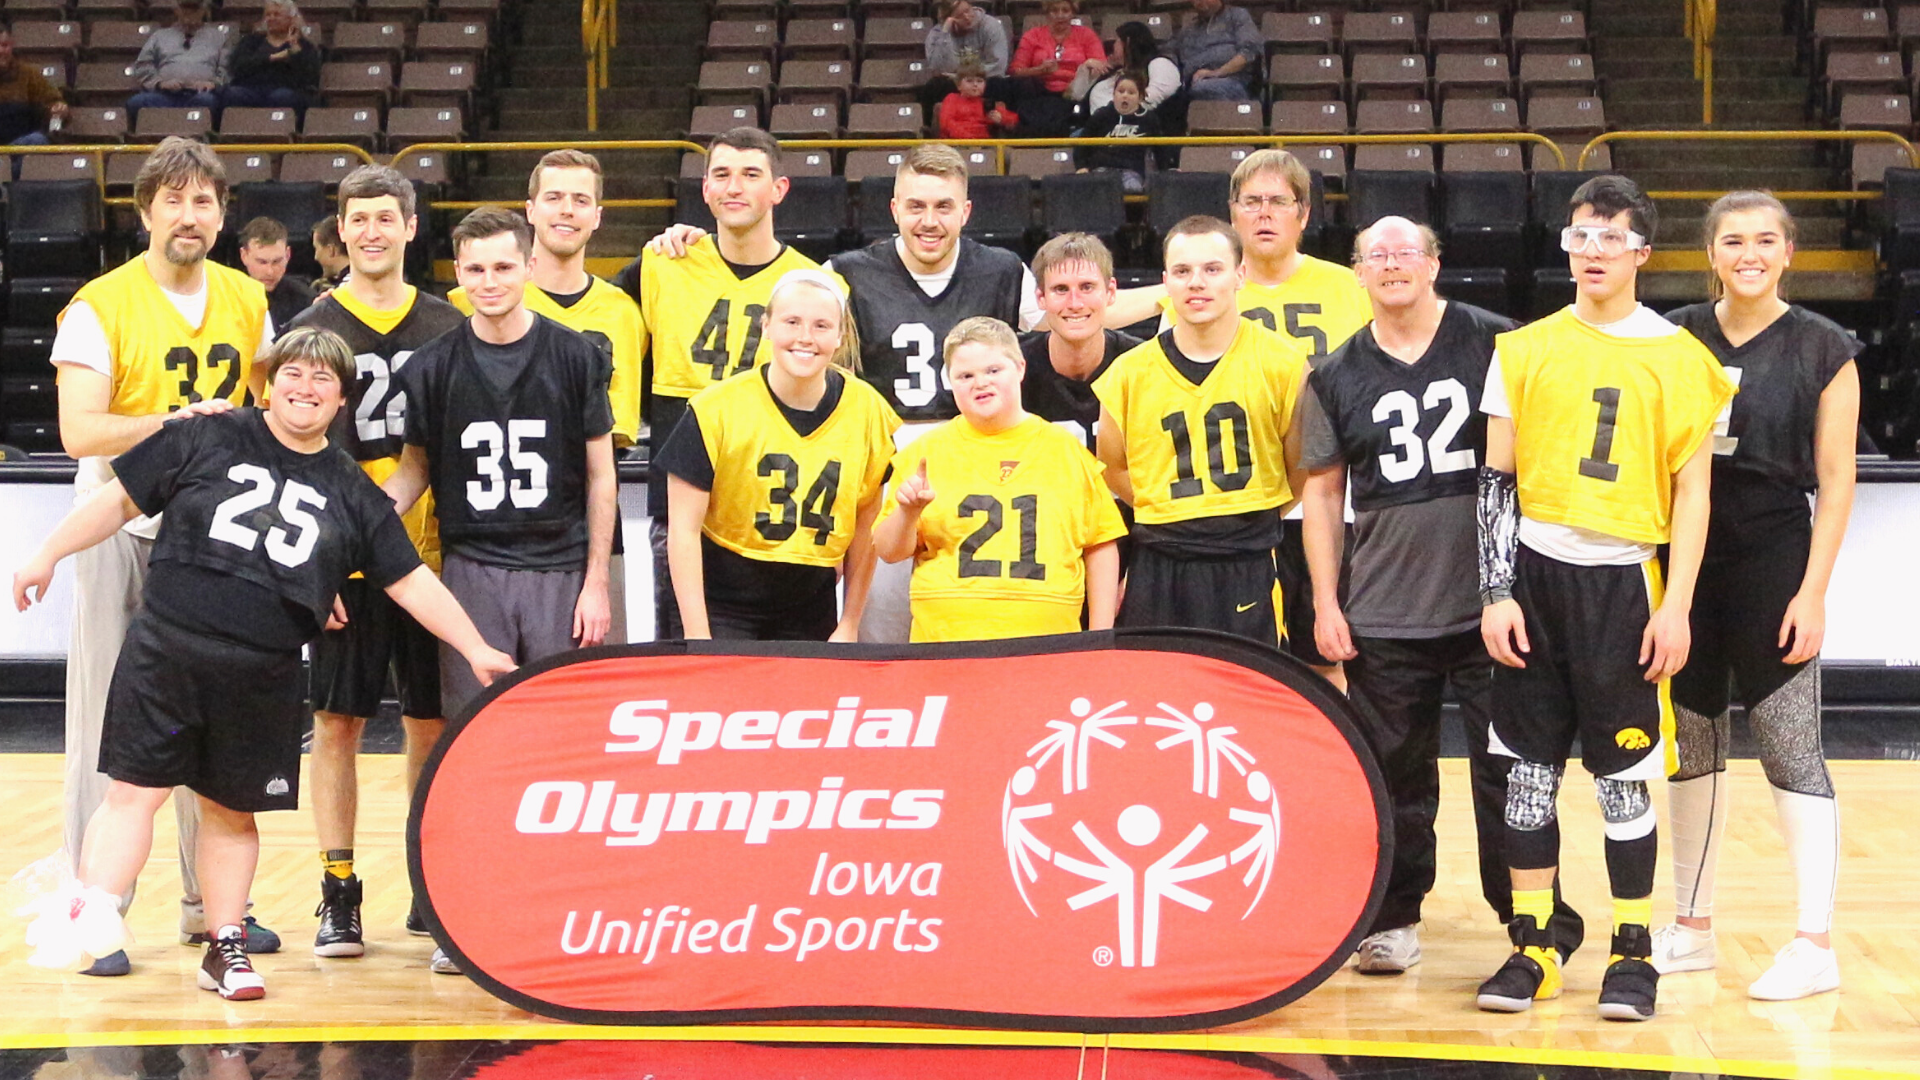 A group of people in sports uniforms celebrating at the Special Olympics